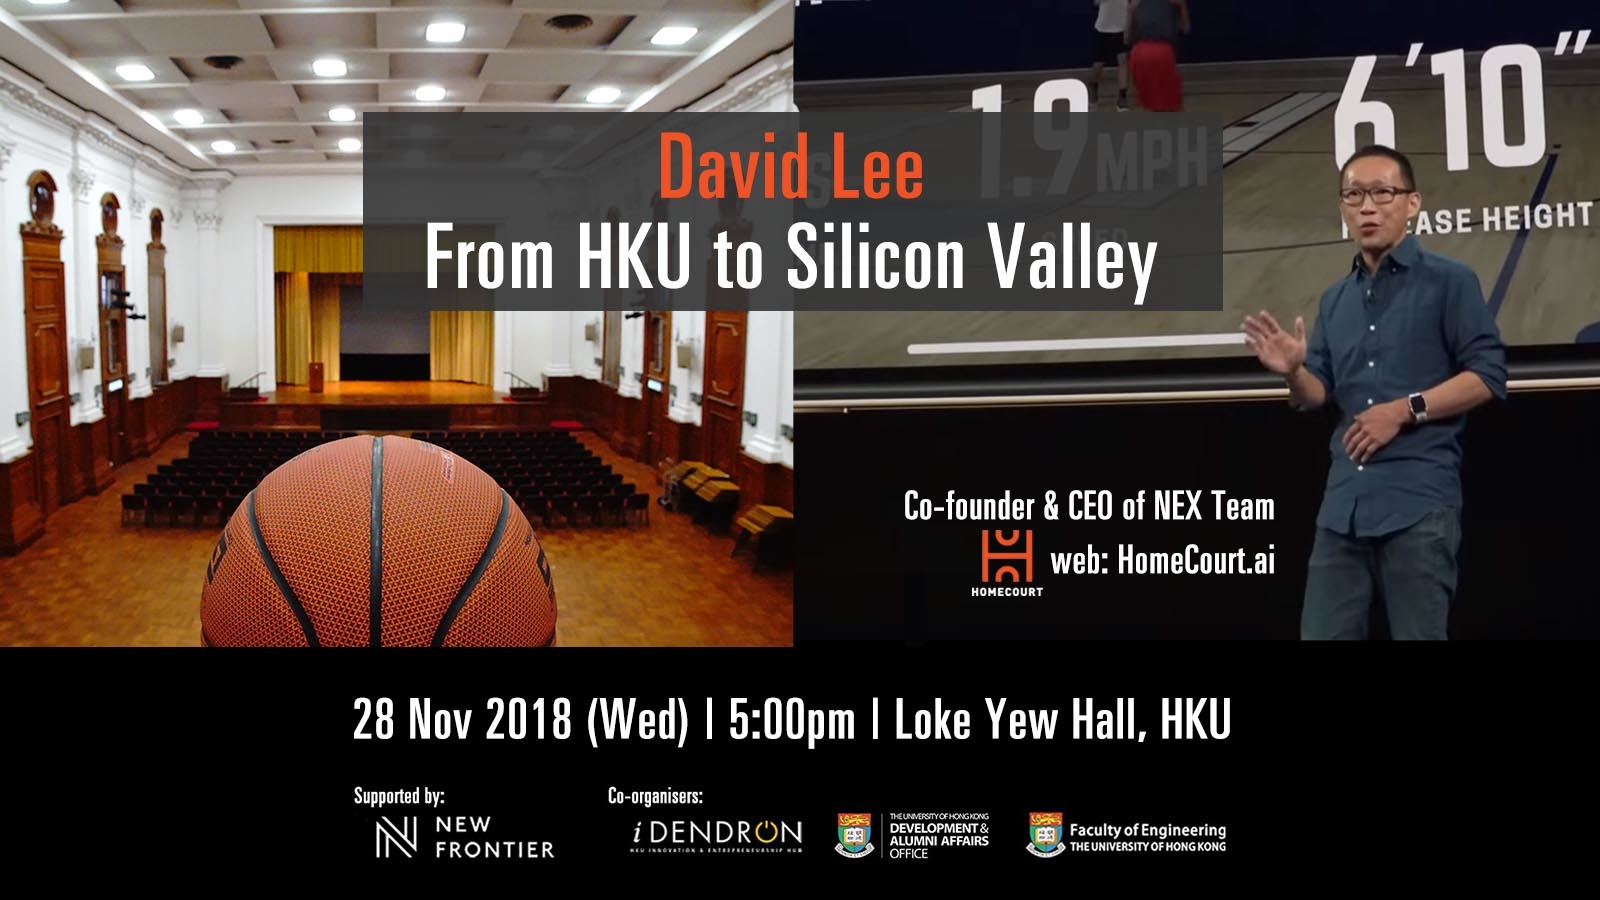 David Lee: From HKU to Silicon Valley